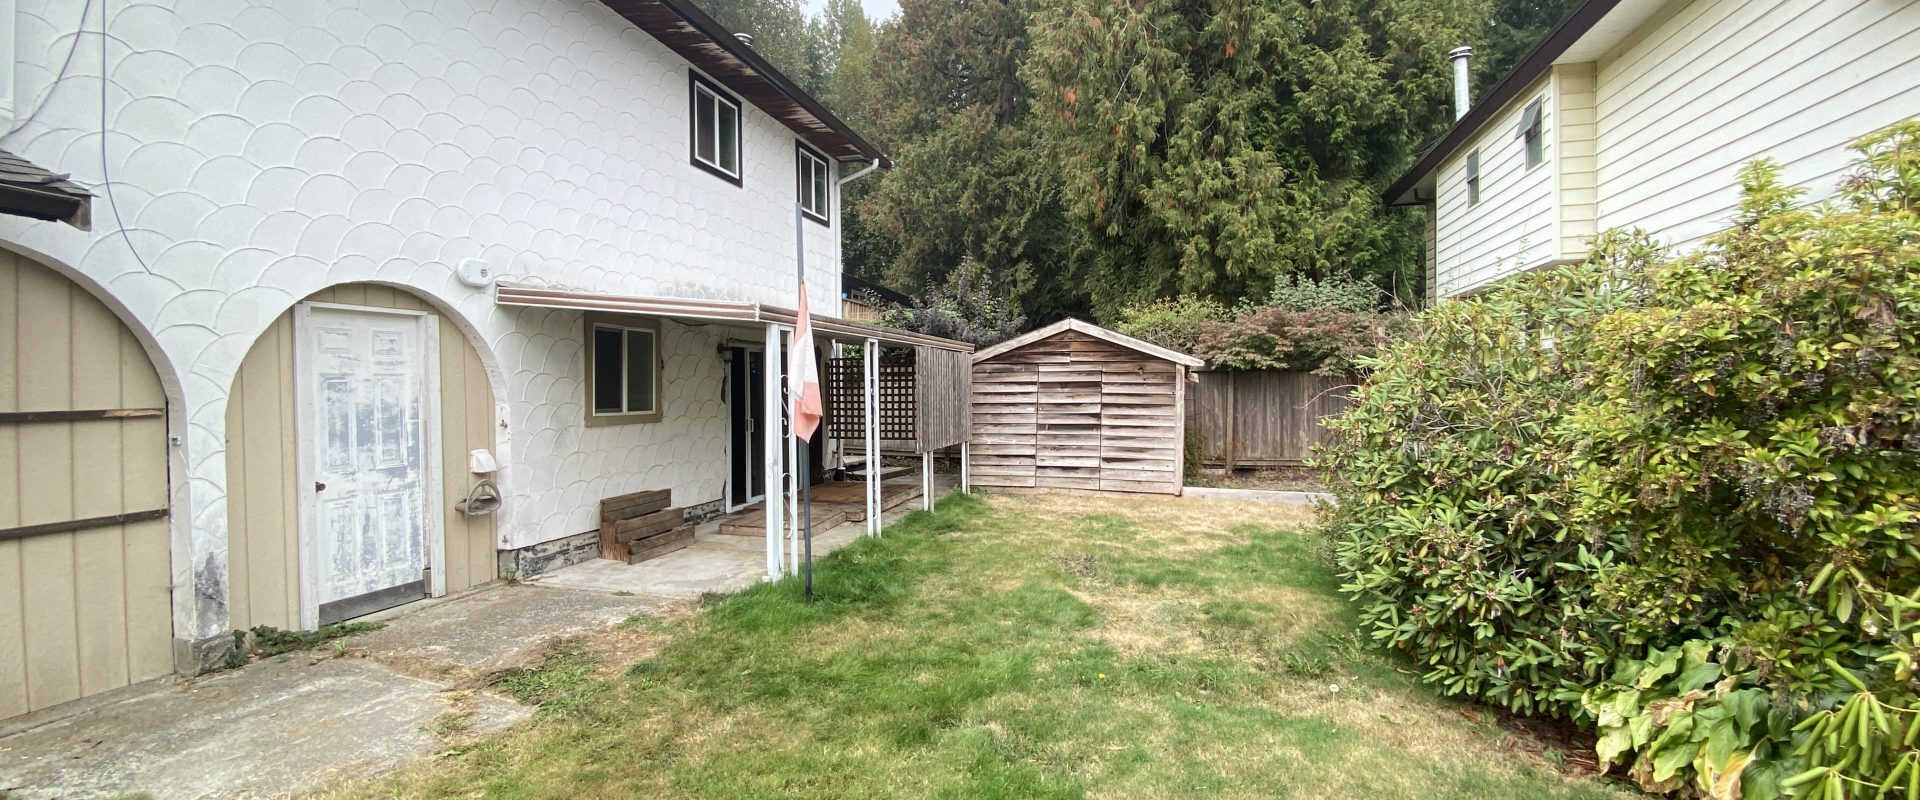 Port Coquitlam Well Maintained House for Rent